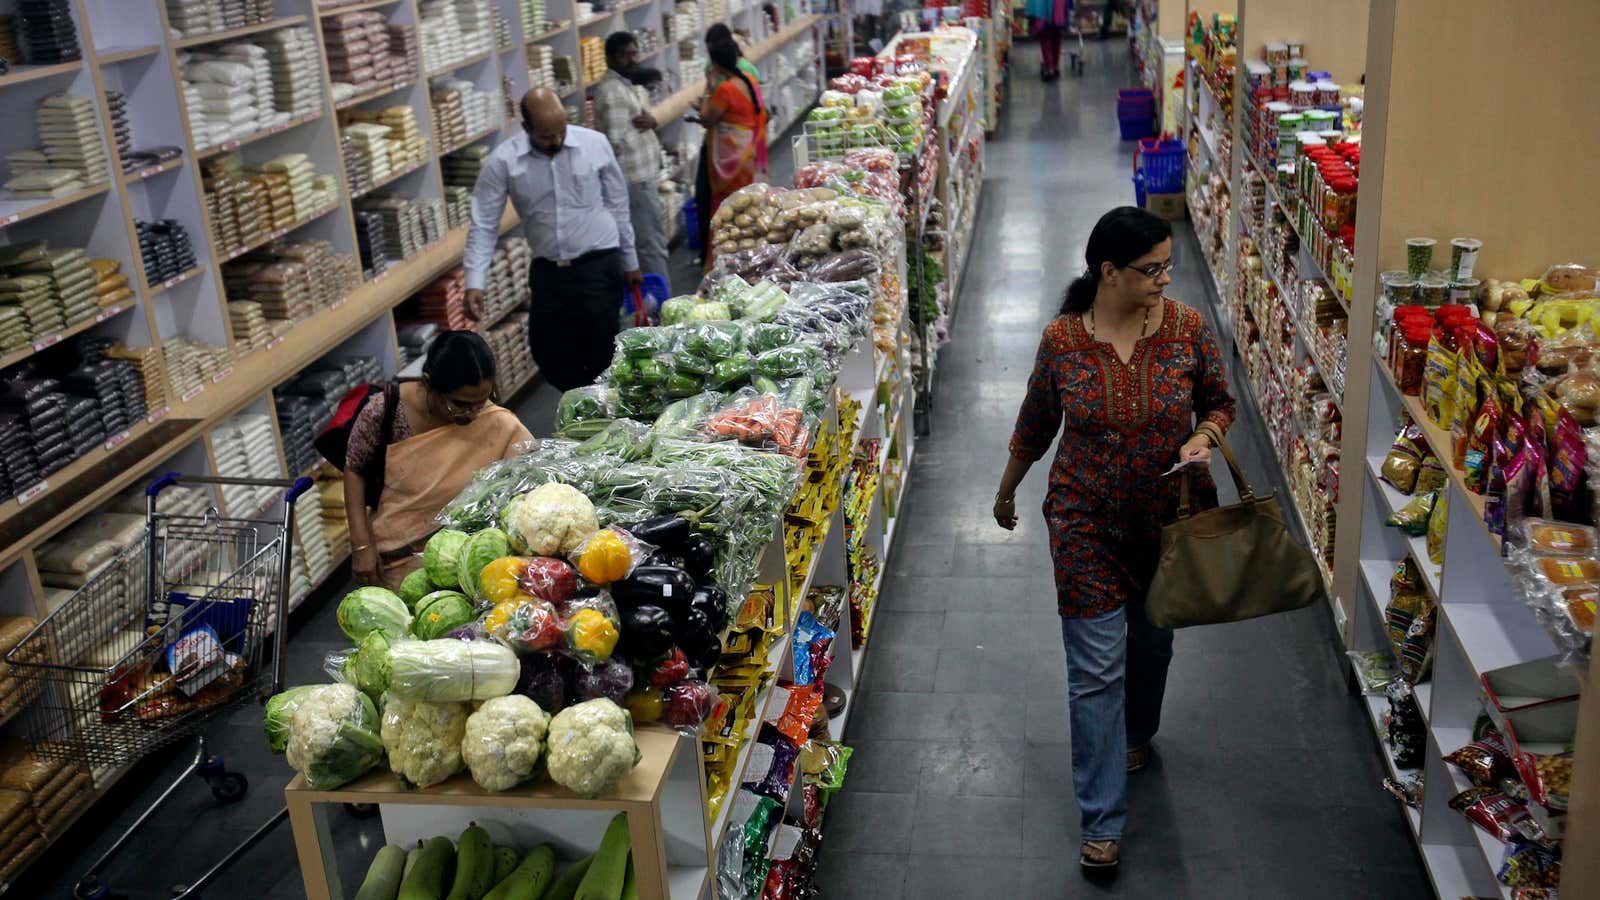 India’s modern retail stores have struggled to capture the market for food.